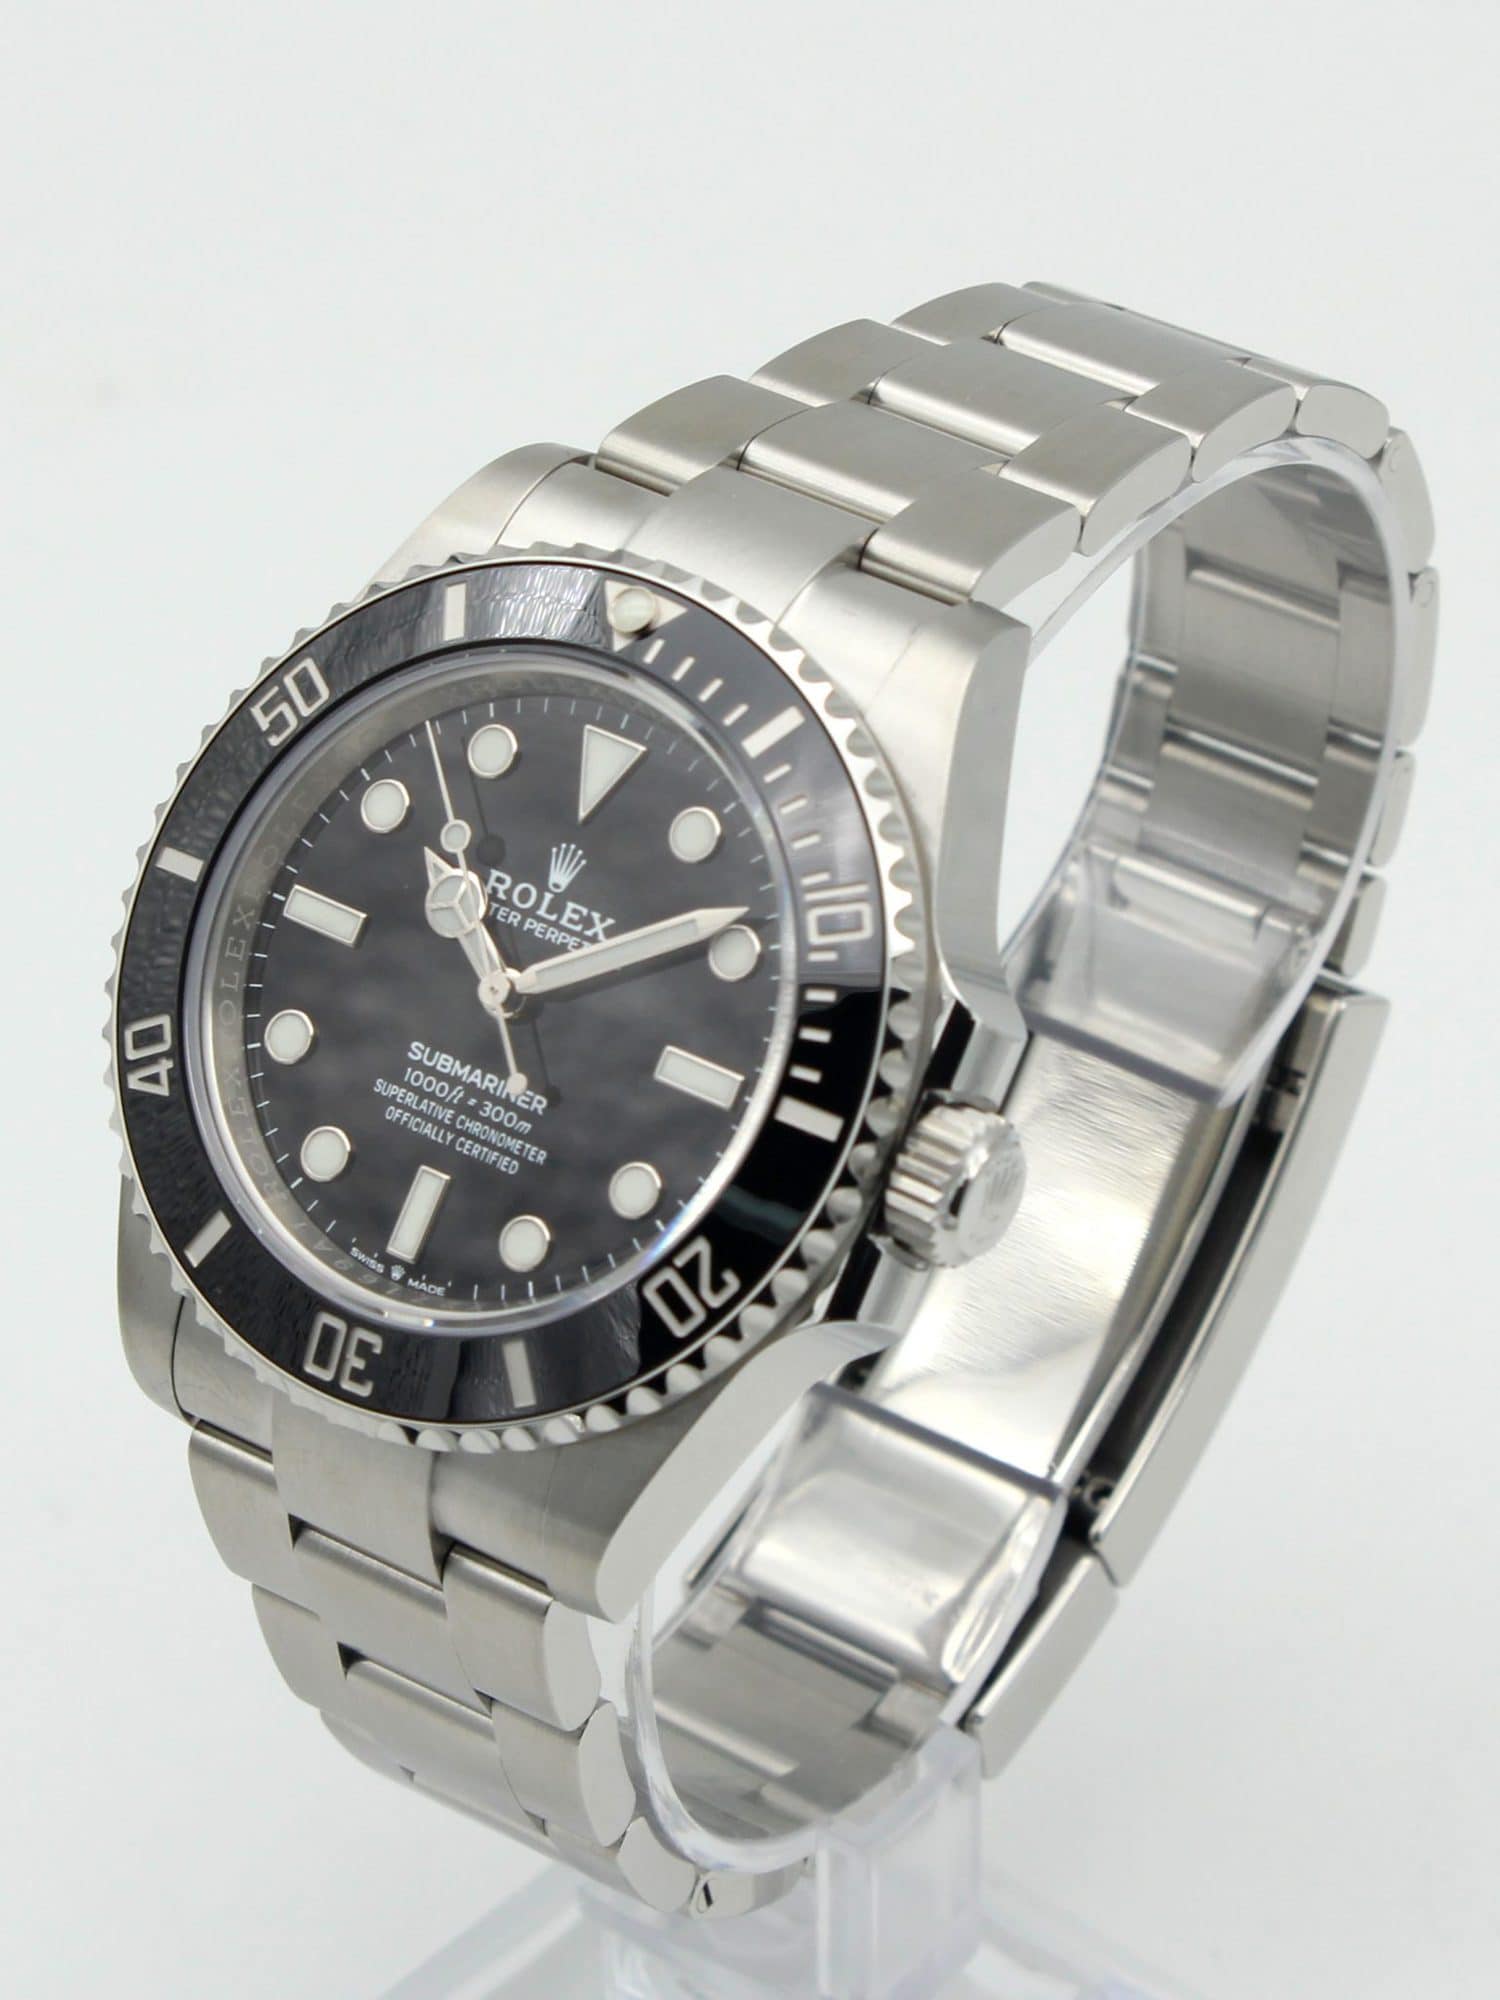 Rolex Submariner 41mm "No Date" Stainless Steel Black Dial Model 124060